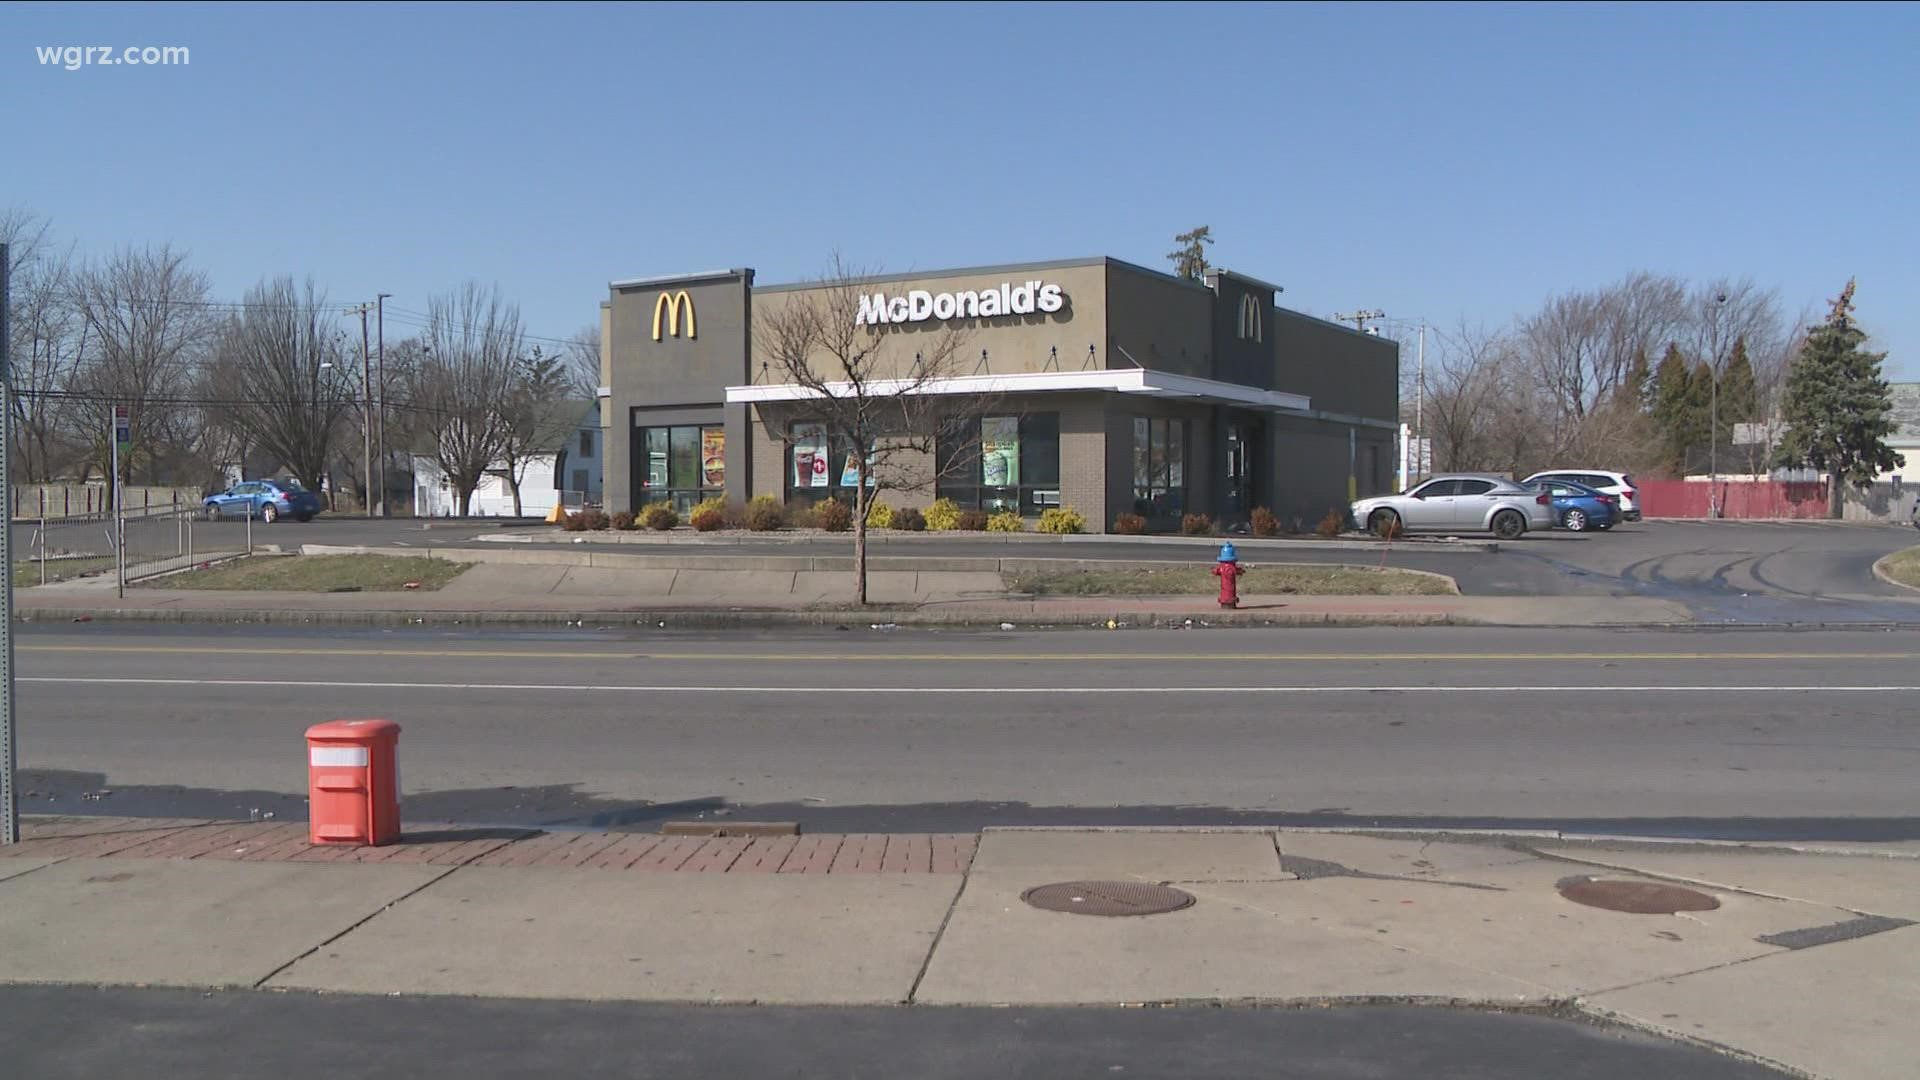 Two men in their 20's are dead after a shooting Saturday night in the McDonalds parking lot on the corner of Genesee street and Bailey avenue.